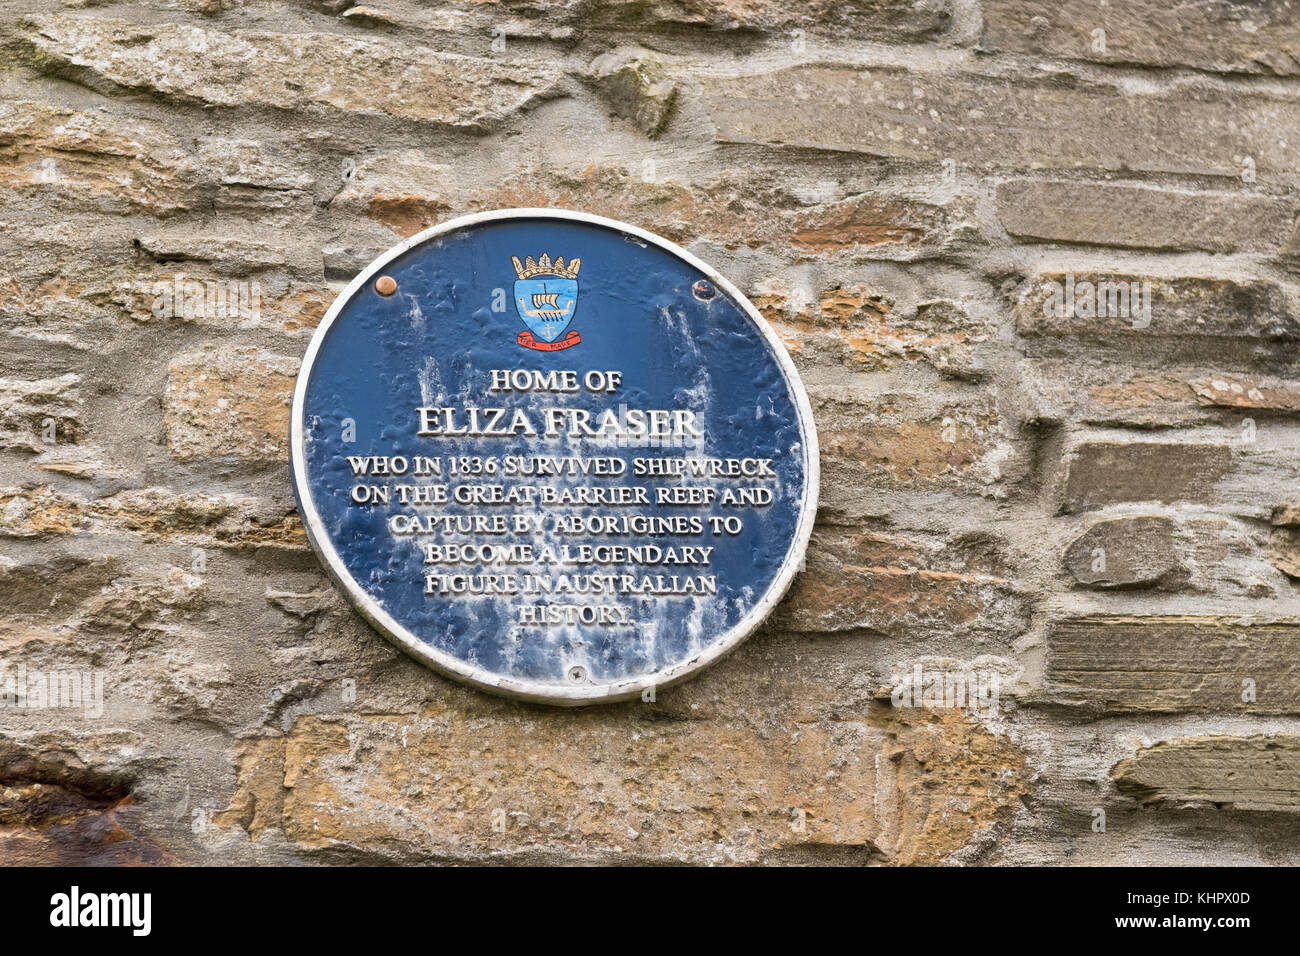 Commemorative plaque on what is believed to have been the home of Eliza Fraser, Stromness, Orkney, Scotland, UK Stock Photo